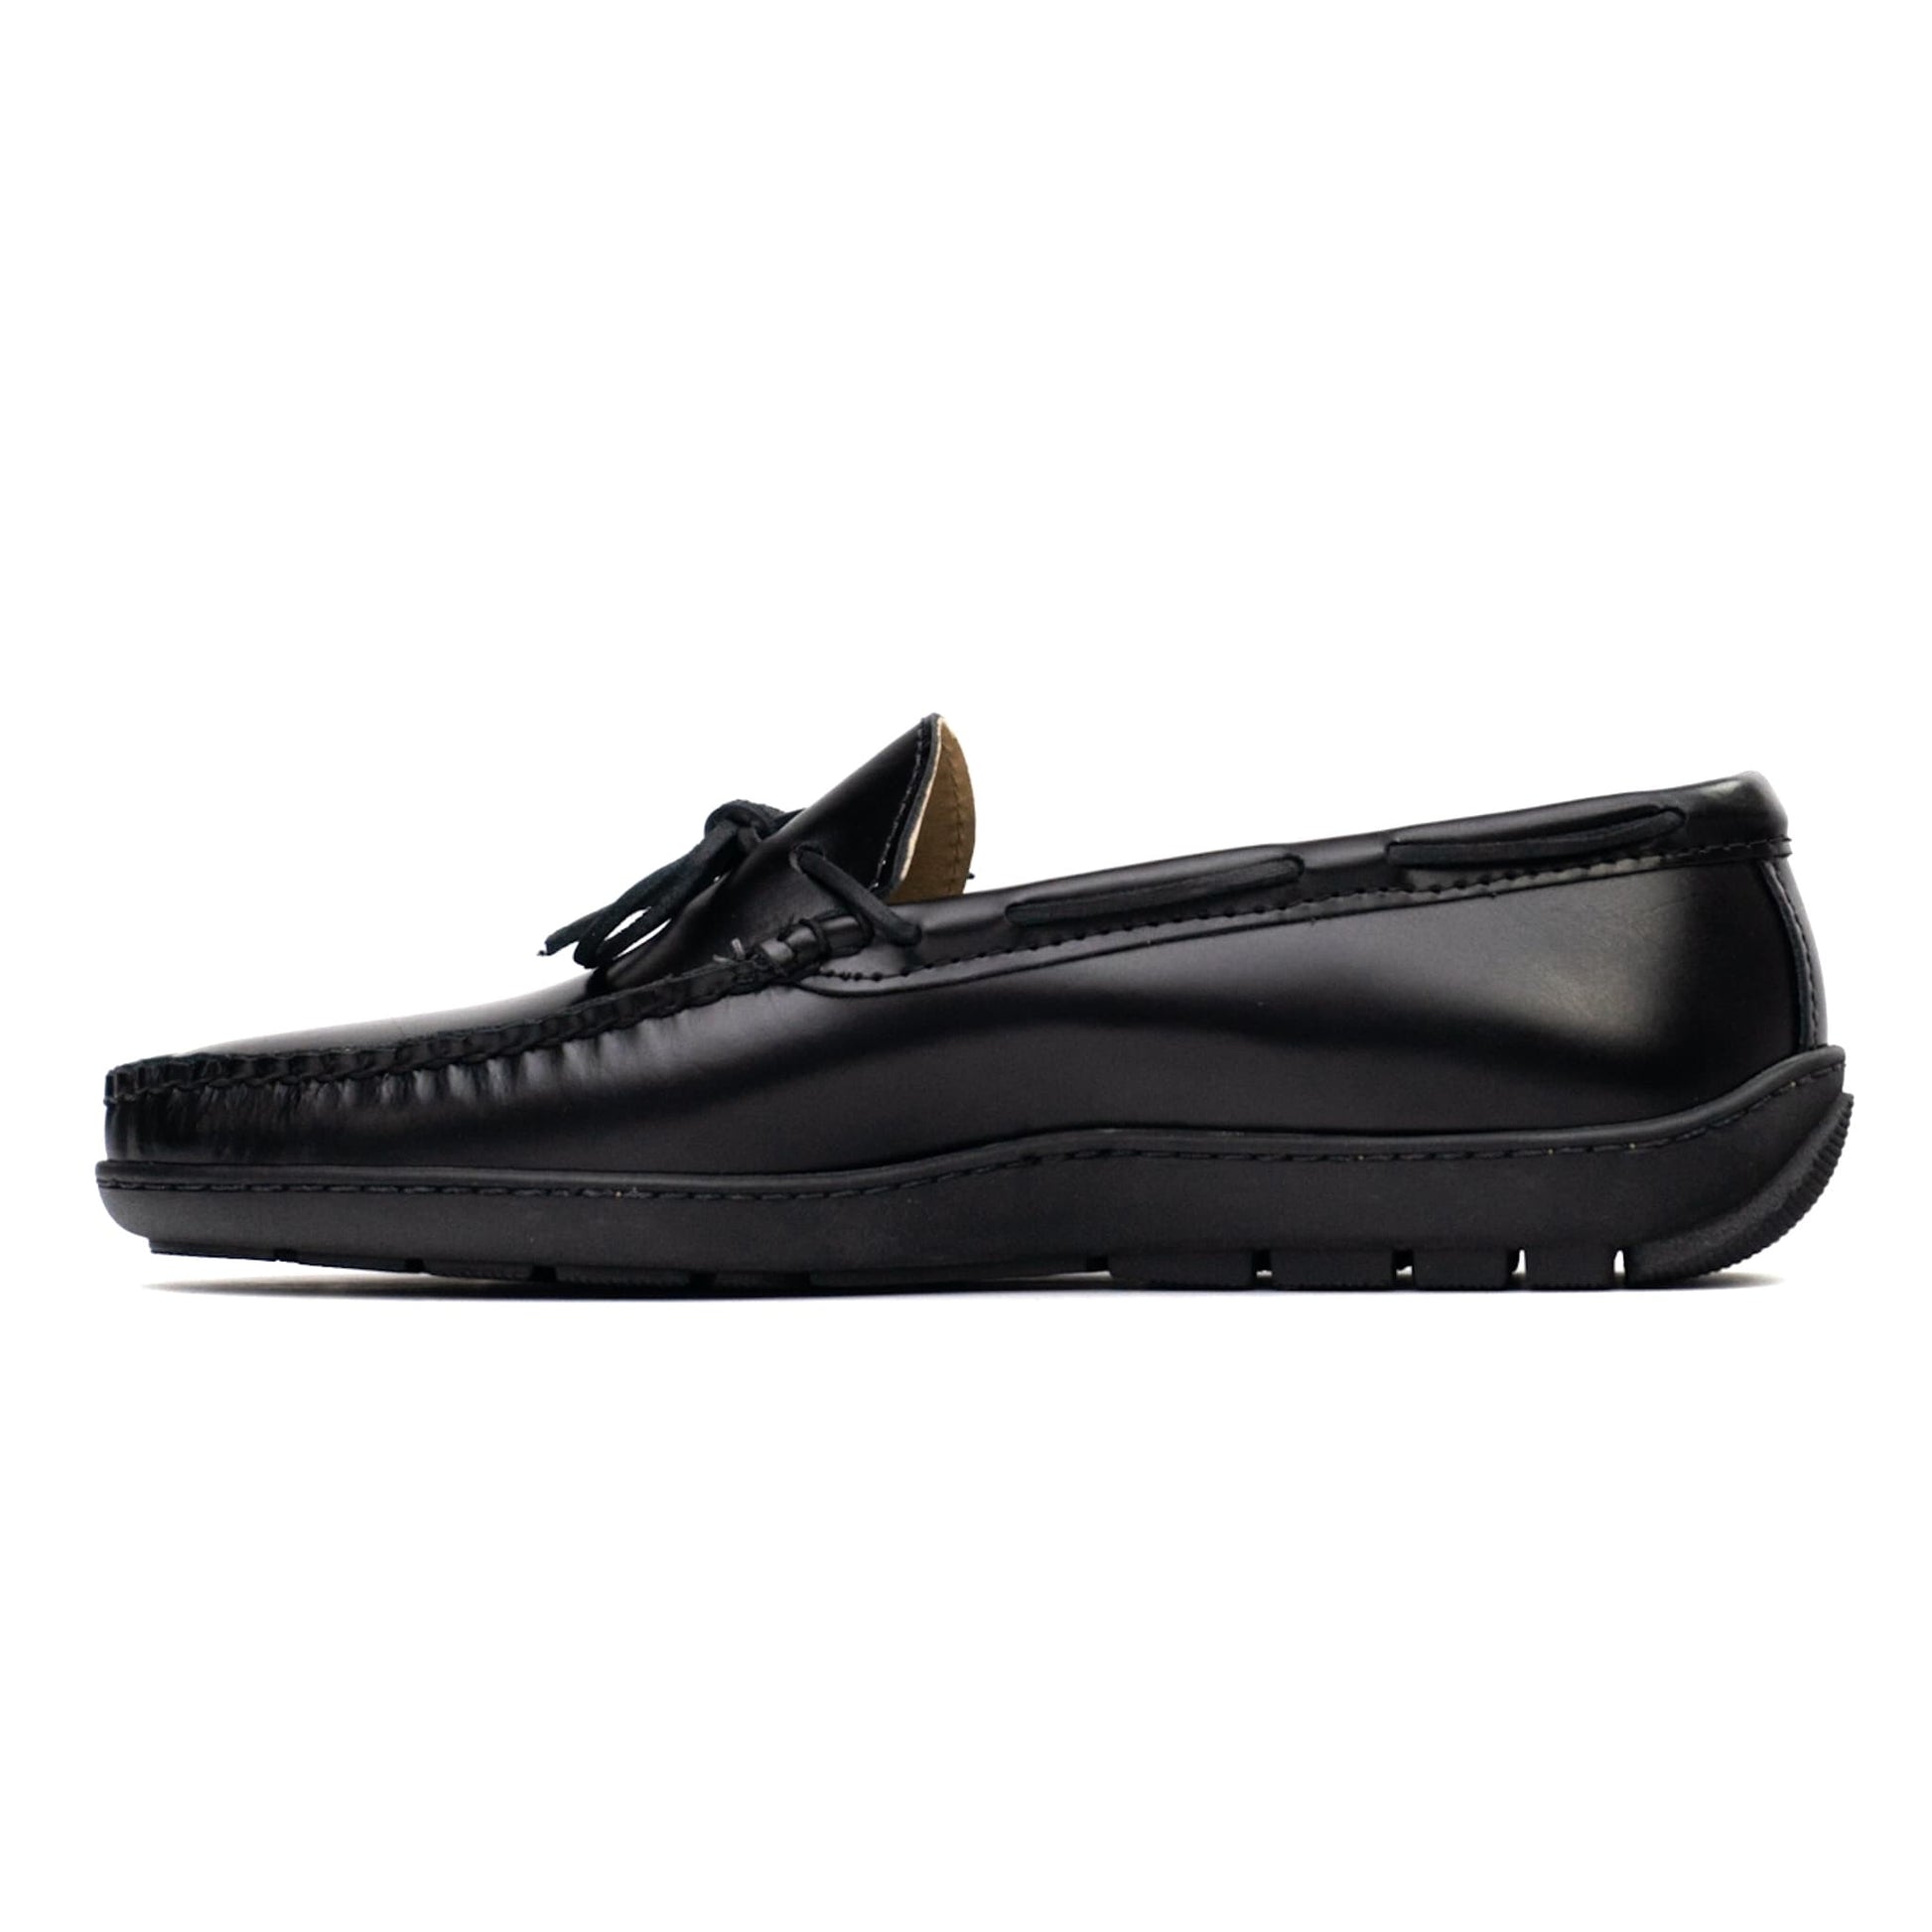 Driving Moc Tie Loafers- Black Oiled Full Grain Leather – Kicks For Gents